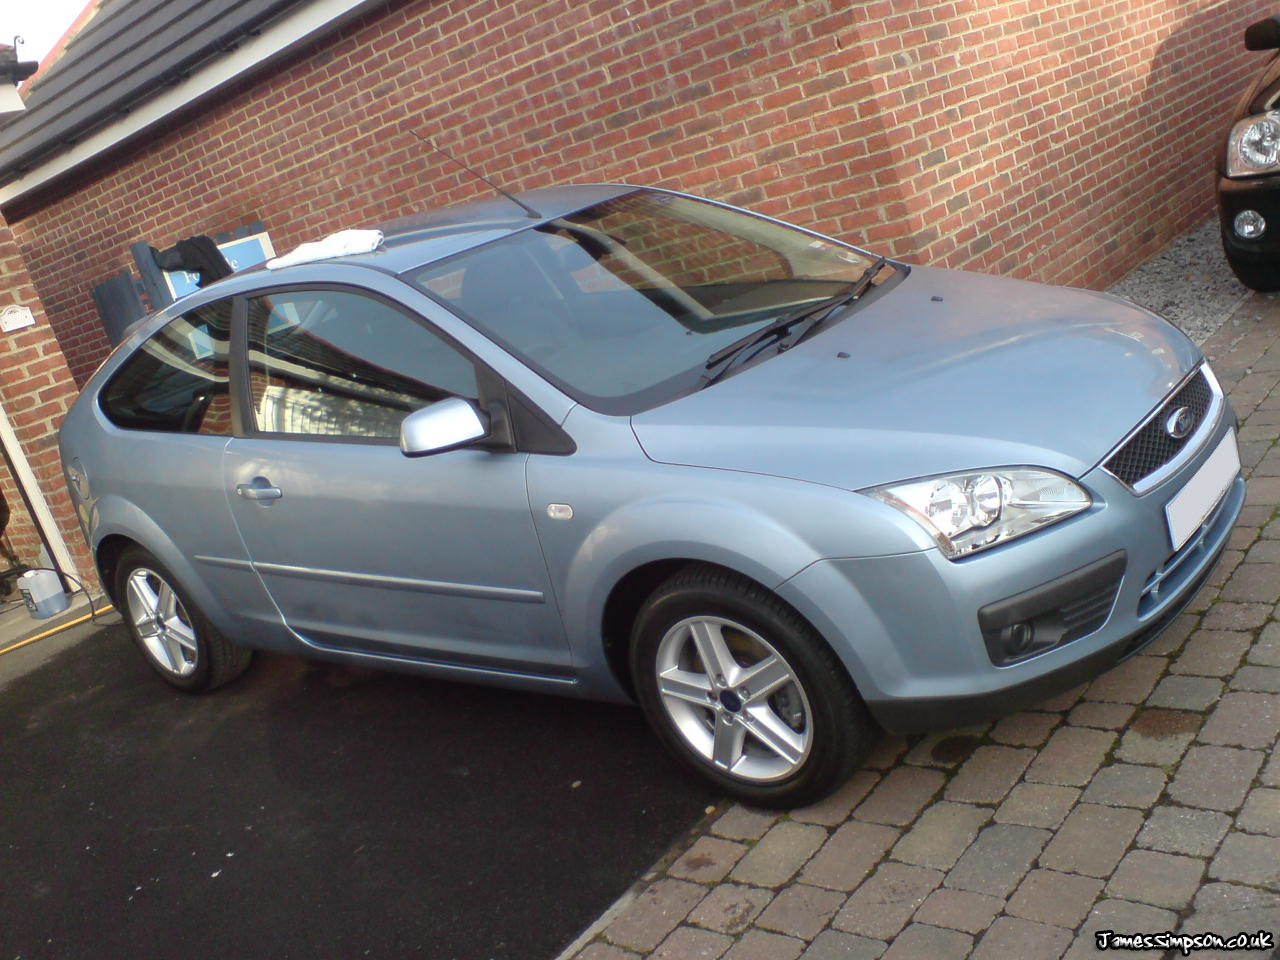 Ford Focus MK2 (20052008) Stereo Removal ST James Simpson